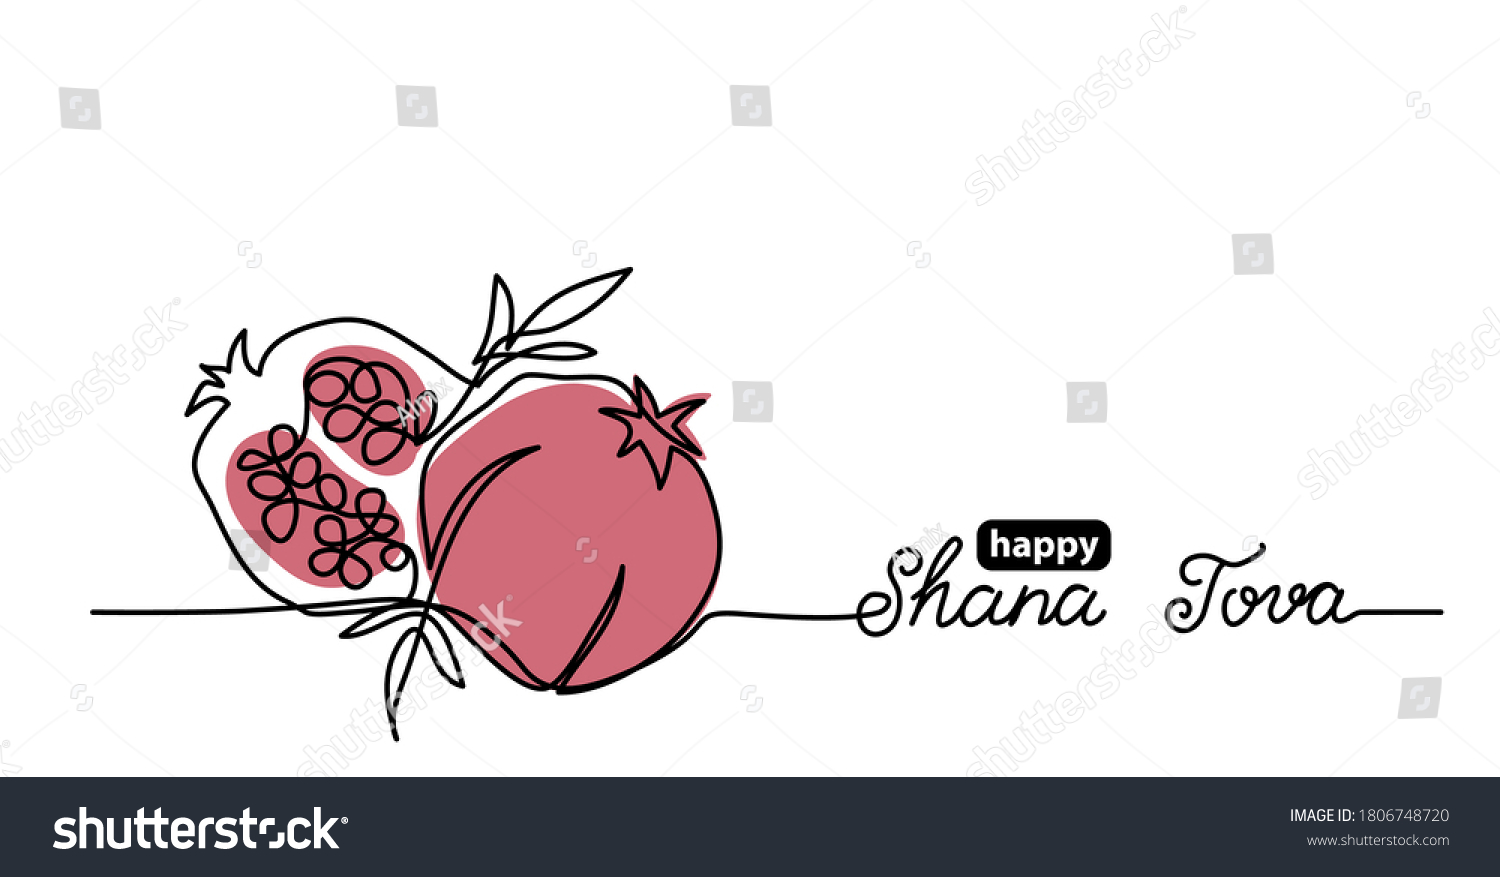 Shana tova simple vector background with pomegranate. One continuous line drawing with lettering happy Shana tova. #1806748720